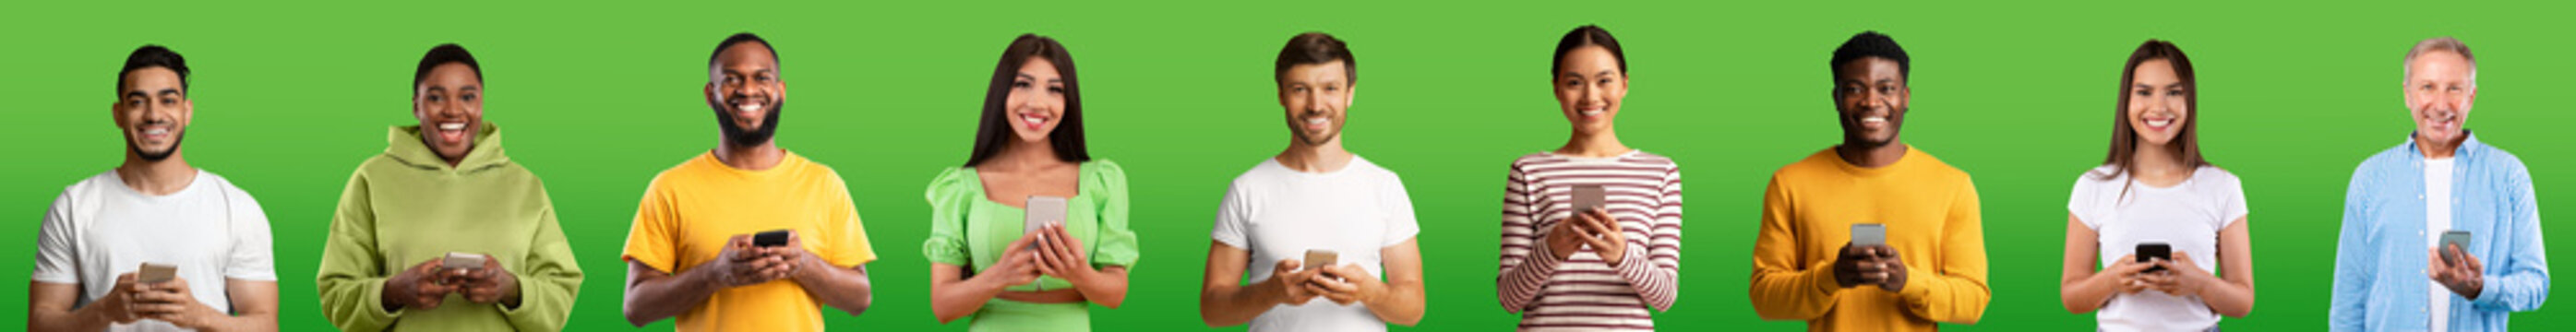 Smiling millennial and old multiethnic guys and ladies in casual chatting on smartphones, isolated on green background